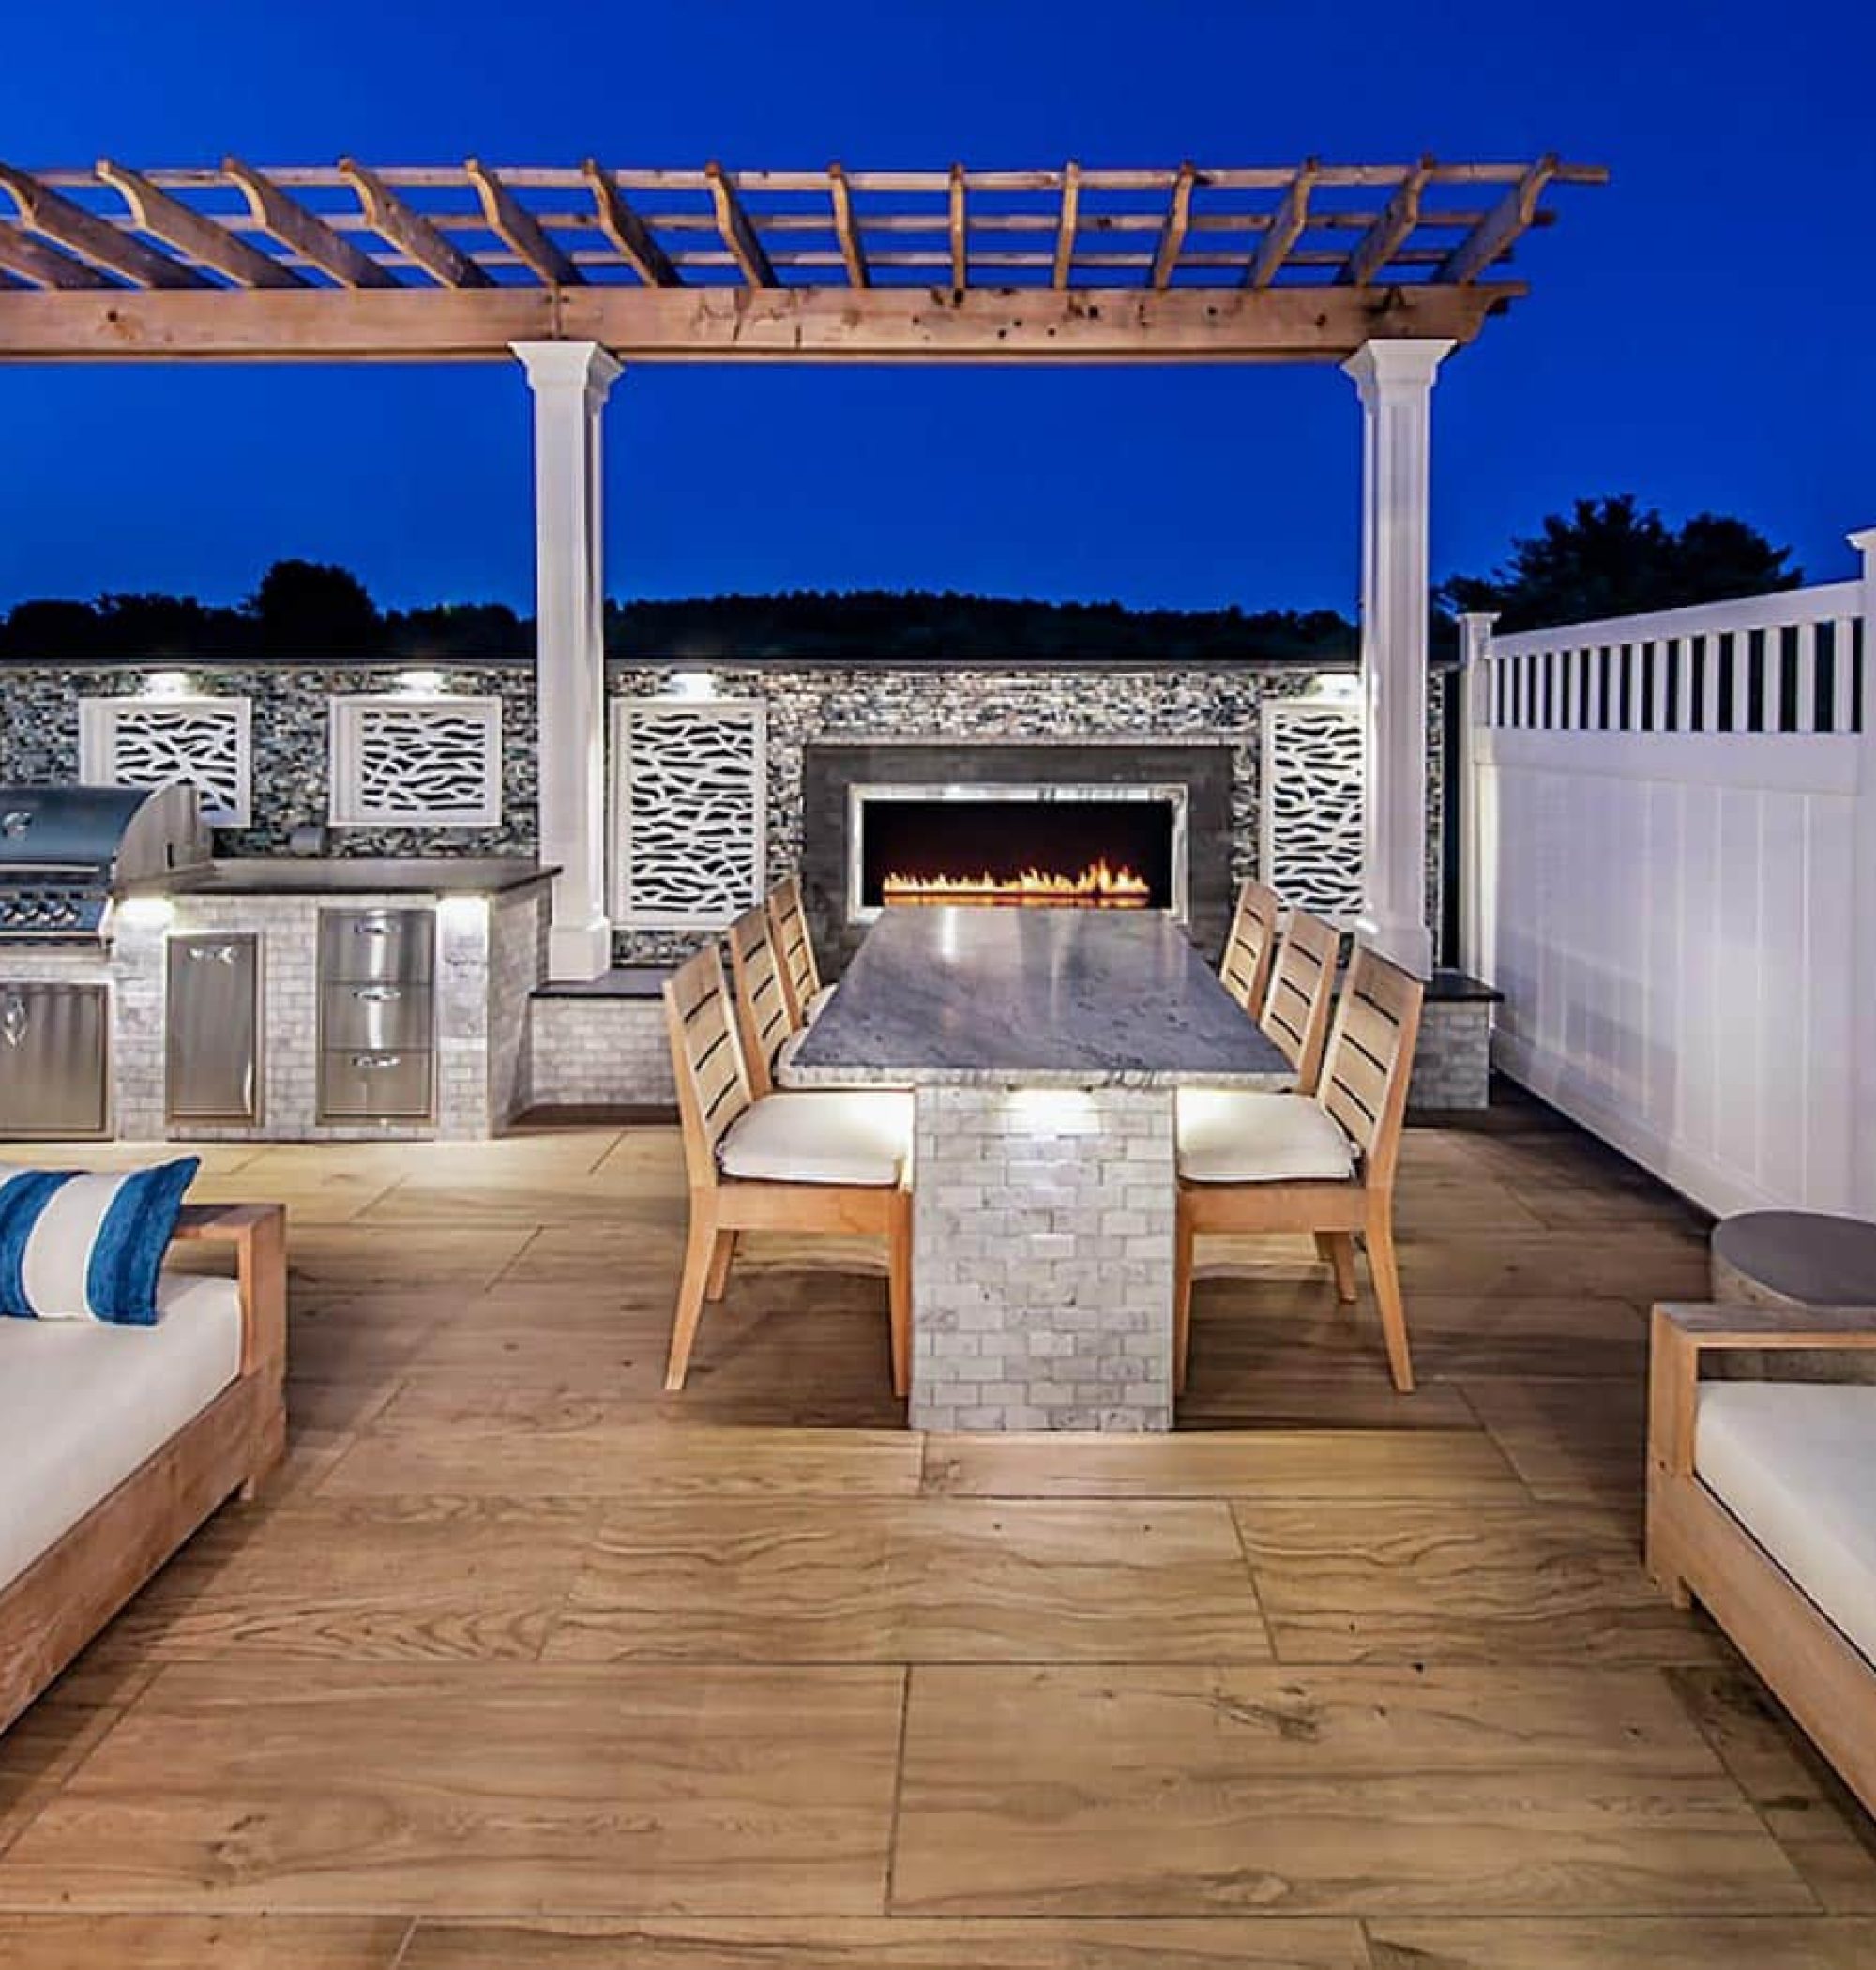 Custom Deck Elevated Outdoor Living Space | Wood deck with chairs, couch, grill, fence, and structure | Backyard Creations | Custom Decks, Porches, and Pergolas